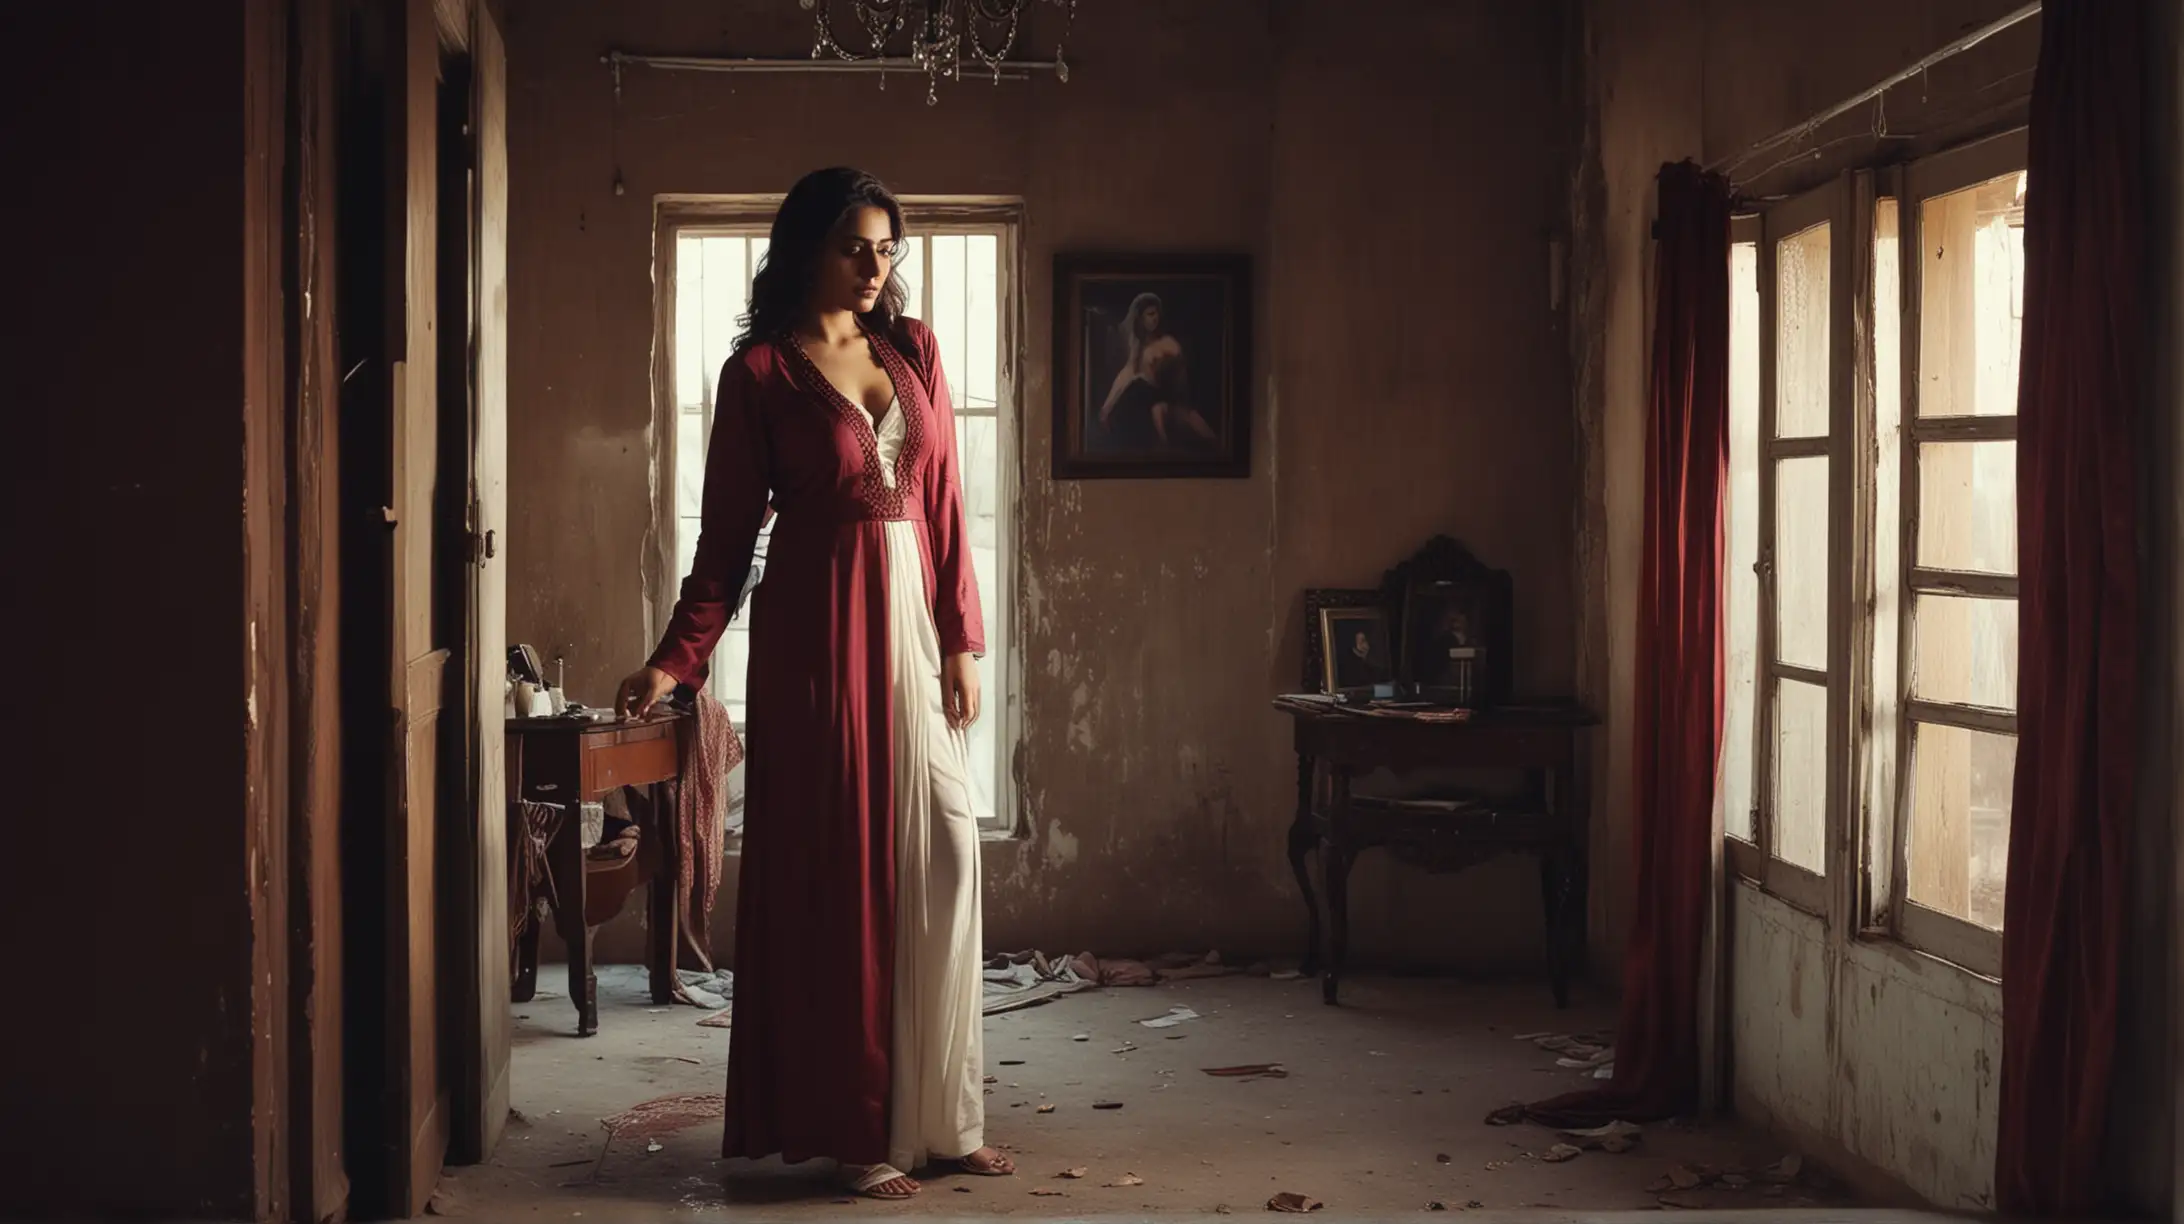 hot and sexy Pakistani girl in maroon color kameez standing inside her dusky old room with window, cleavage. Old fat man wearing white dress is standing next to her holding her shoulder. Neo Noir style, cinematic